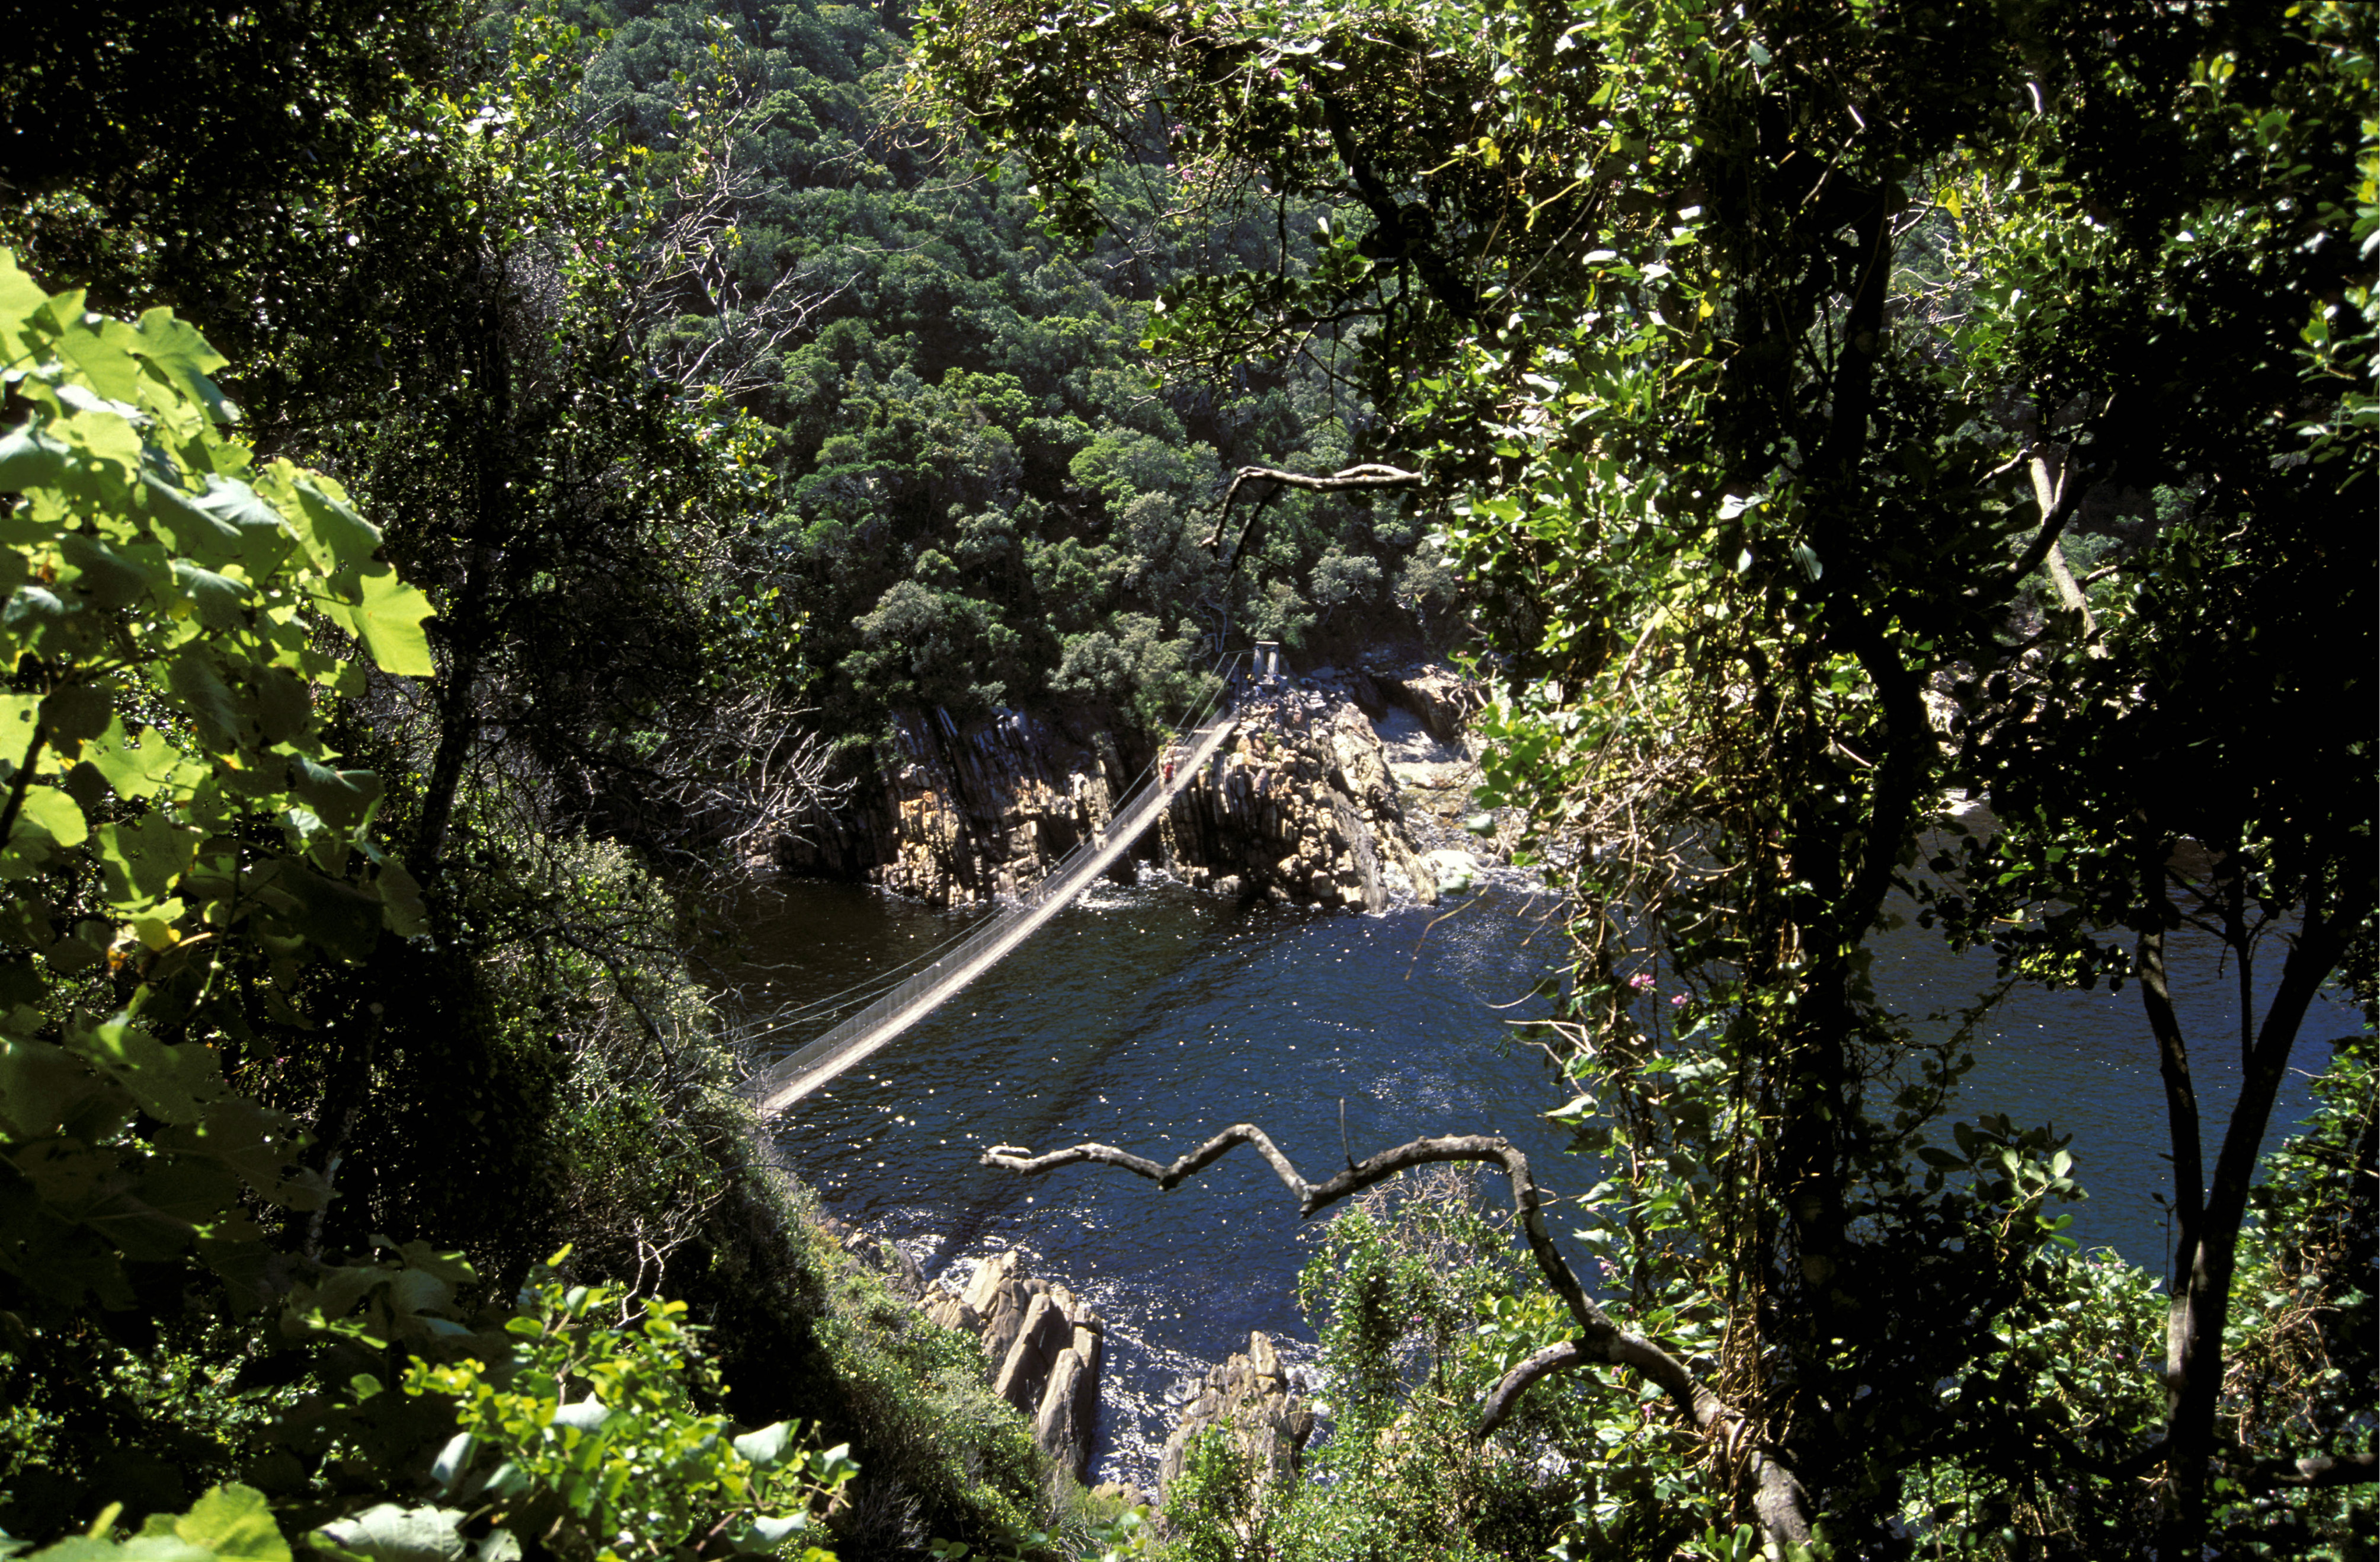 Suspension bridge, Storms River Mouth, Garden Route, Eastern Cape, South Africa. Overhead shot of people standing on bridge across river mouth, surrounded by forest.